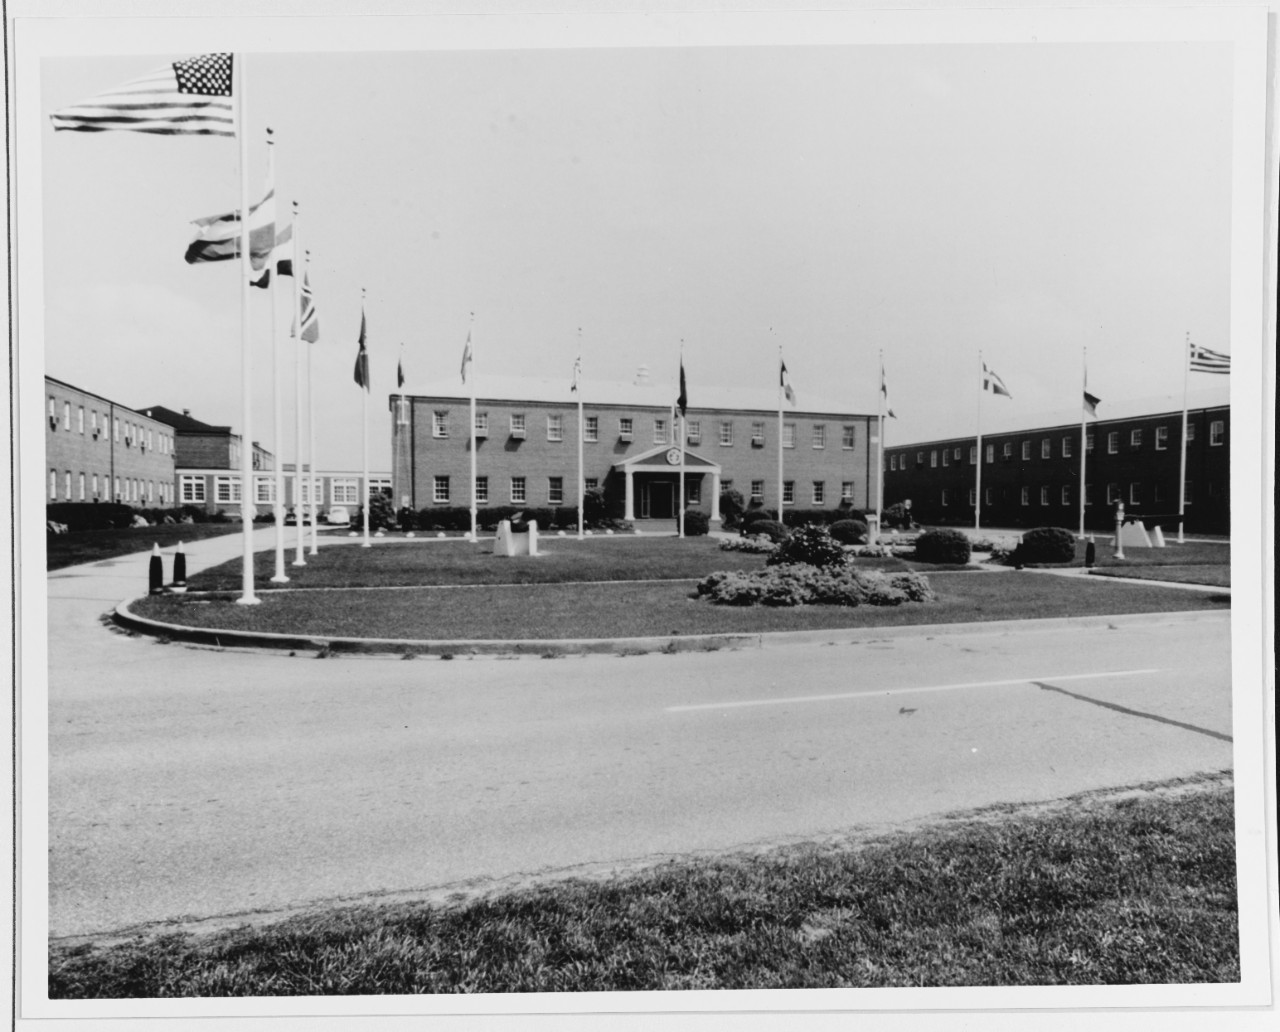 The Flag Plaza at the Headquarters of the North Atlantic